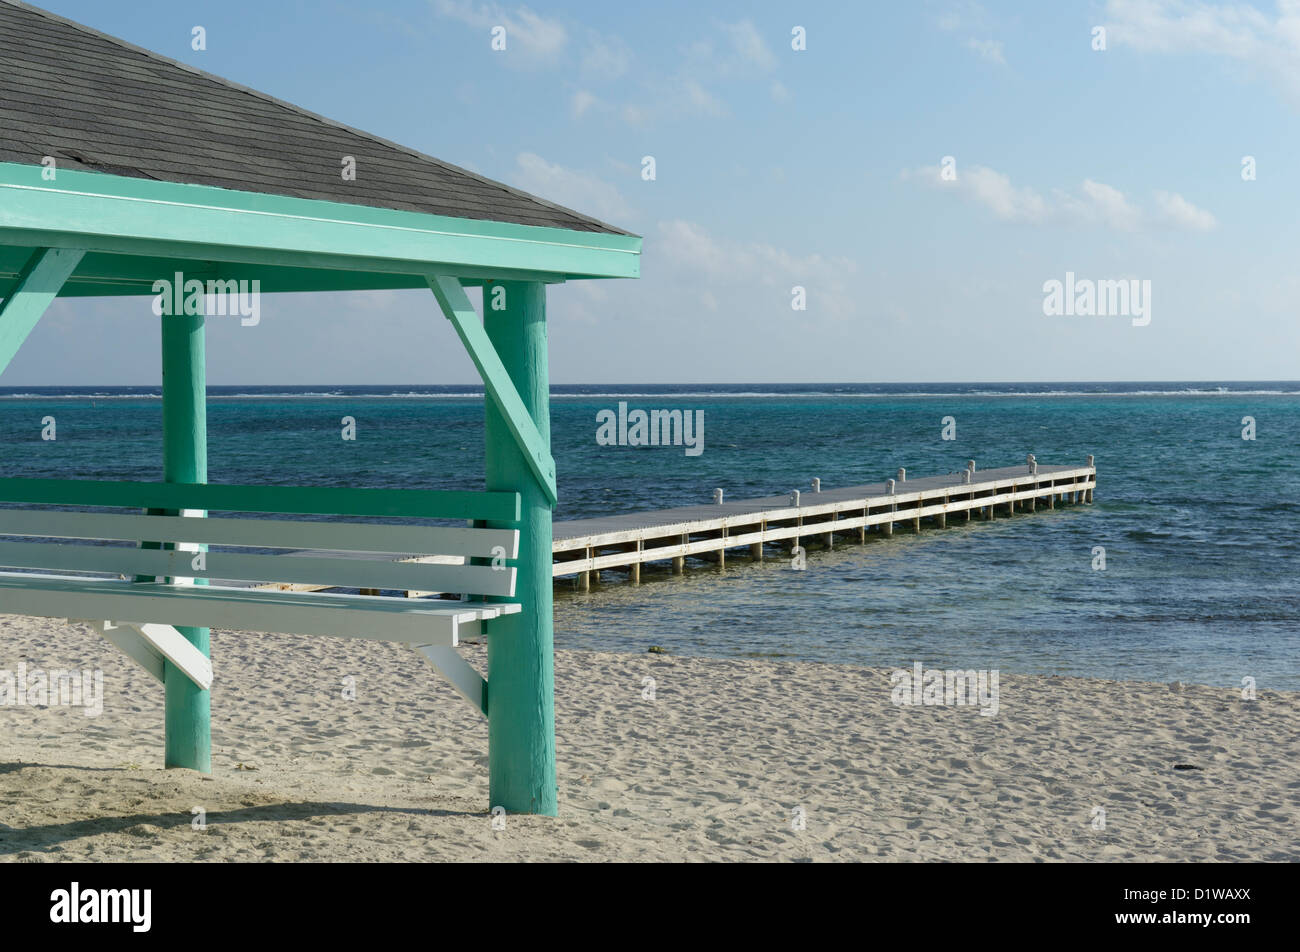 Dock at Colliers Public Beach, East End, Grand Cayman, Cayman Islands, British West Indies Stock Photo